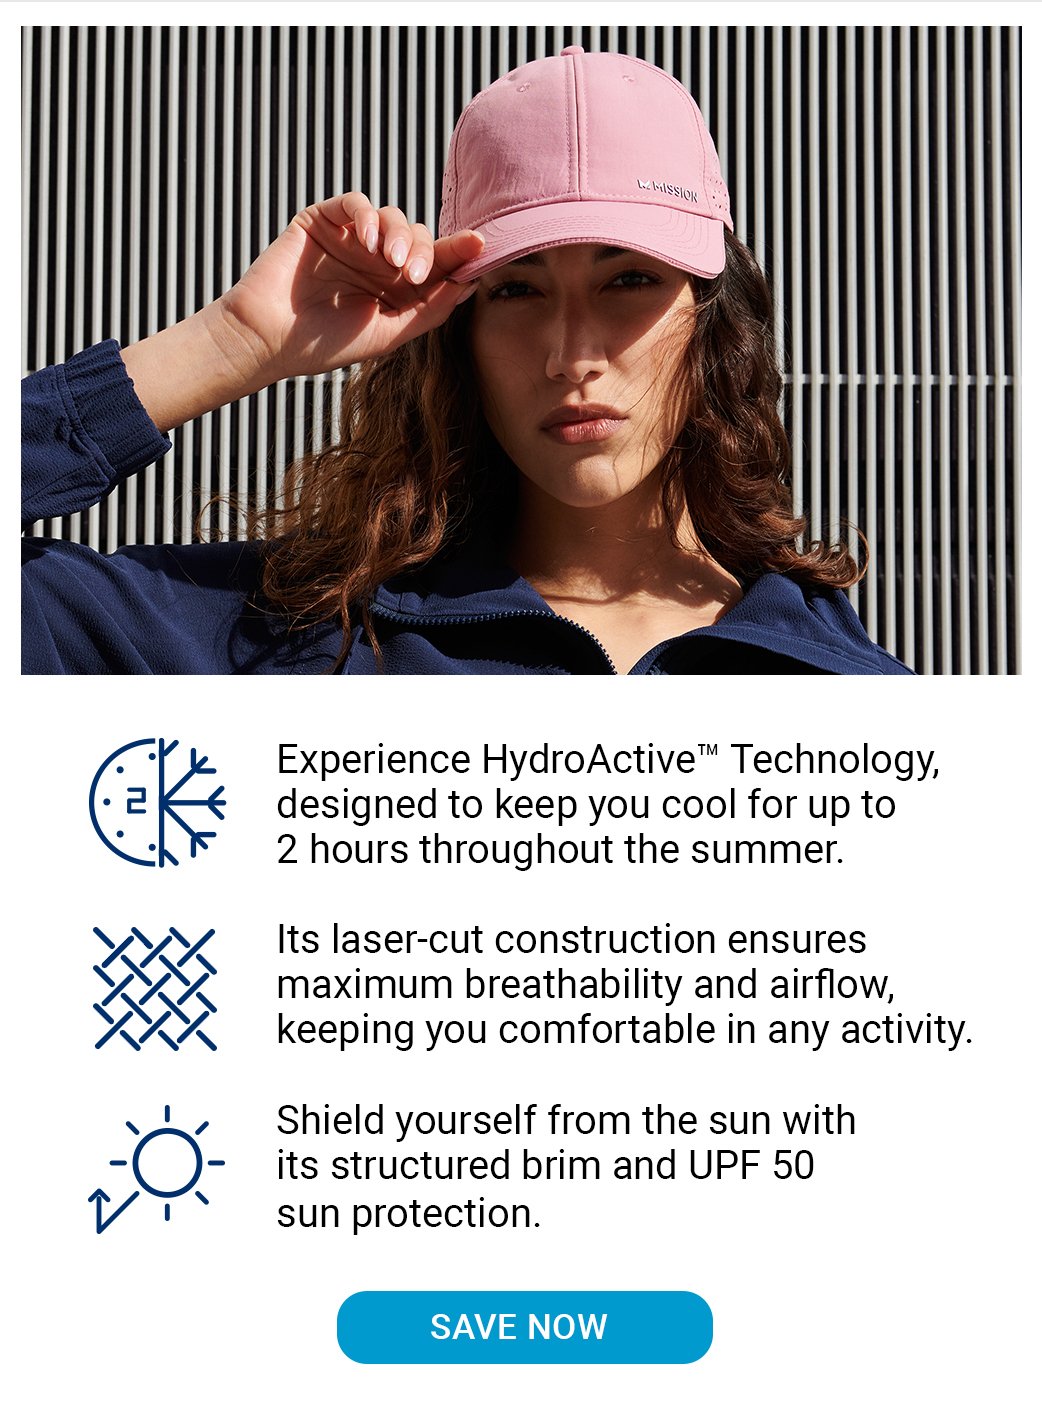 Experience HydroActive™ Technology, designed to keep you cool for up to 2 hours throughout the summer. Its laser-cut construction ensures maximum breathability and airflow, keeping you comfortable in any activity. Shield yourself from the sun with its structured brim and UPF 50 sun protection. [SAVE NOW]